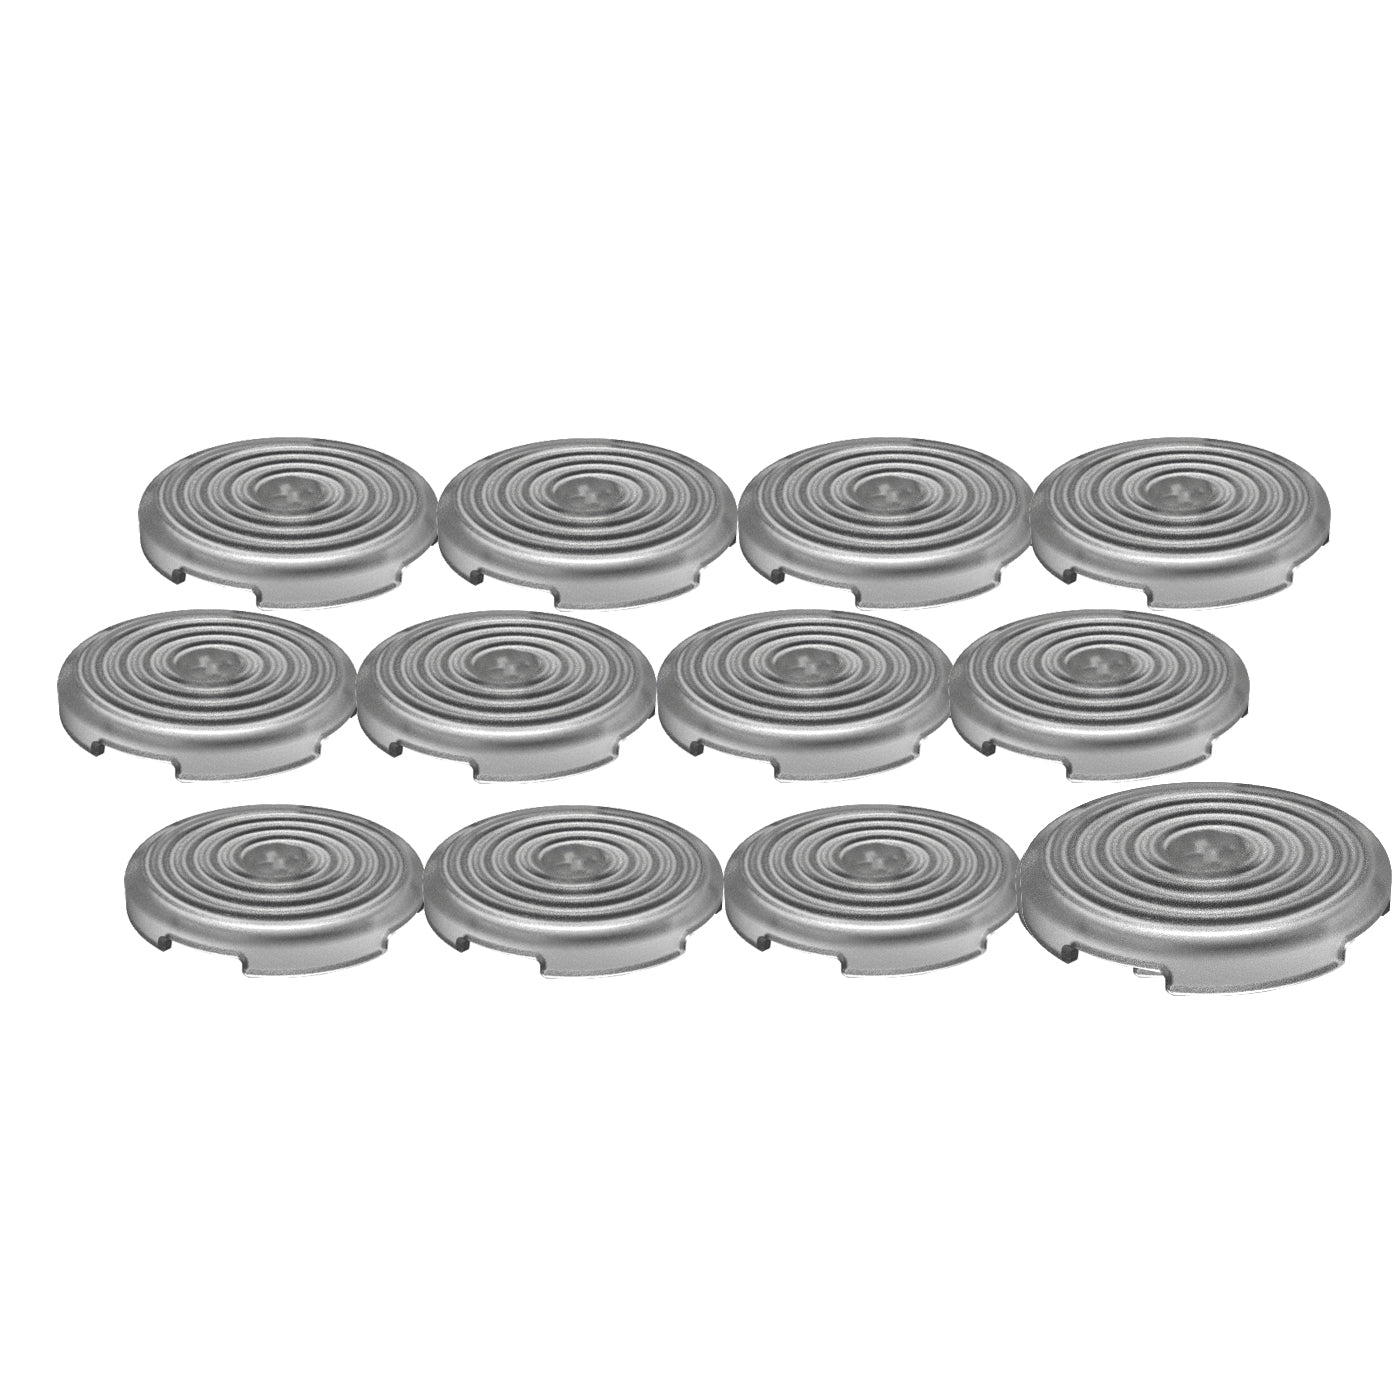 11pcs 24mm 1pcs 30mm Arcade Replacement Hitbox Button Caps for Mechanical PushButtons Caps for Cherry MX Switches Cap Kailh Box Switches Cap Free Shipping